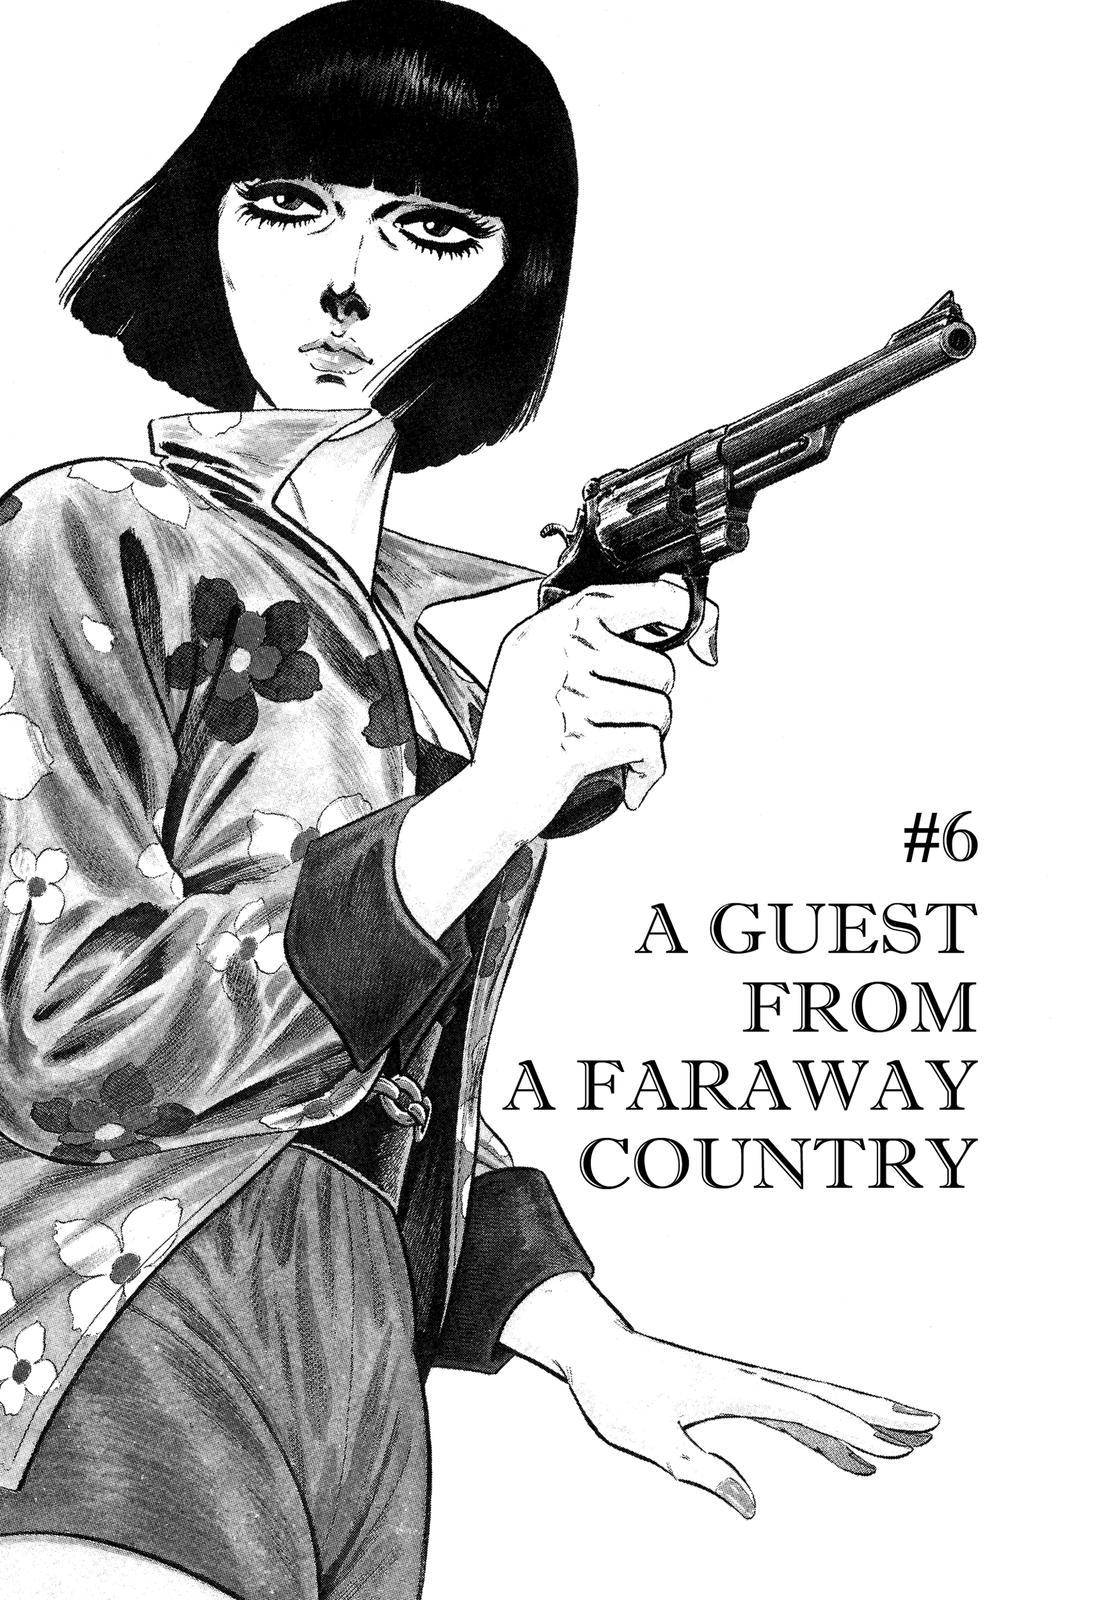 Doll: The Hotel Detective Vol. 2 Ch. 11 A Guest from a Faraway Country